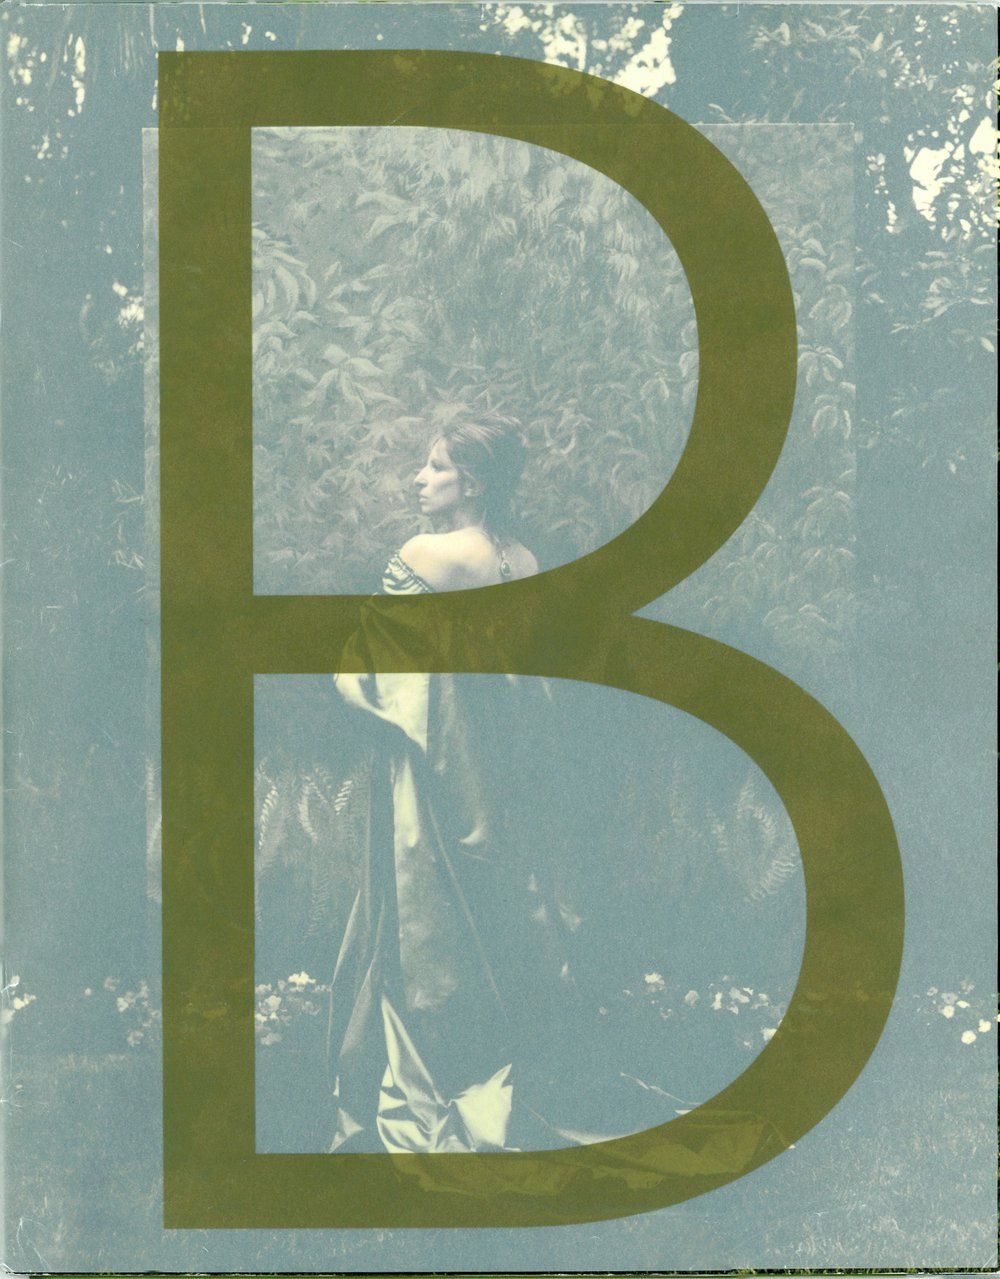 The cover of the 2006 concert program, with an opaque “B” fold-over.